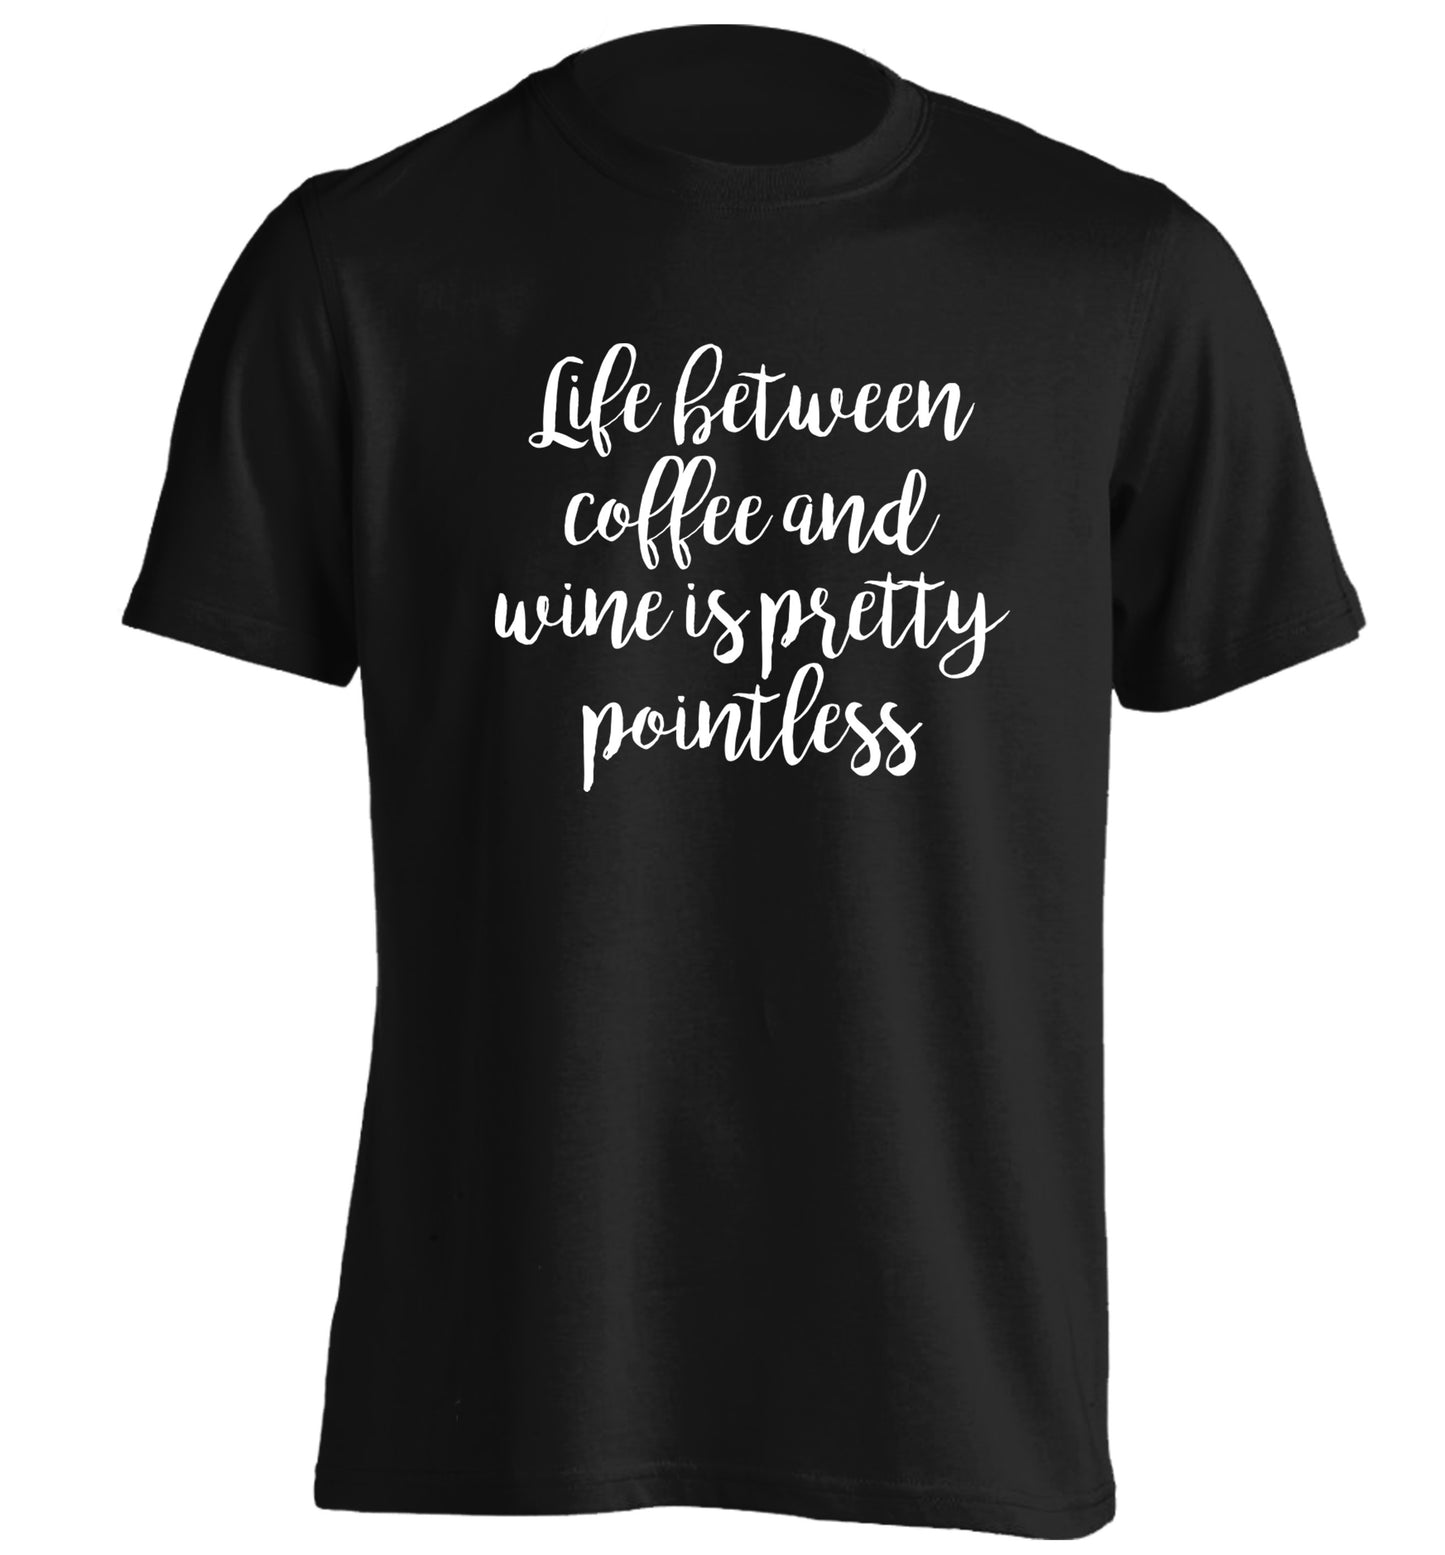 Life between coffee and wine is pretty pointless adults unisex black Tshirt 2XL